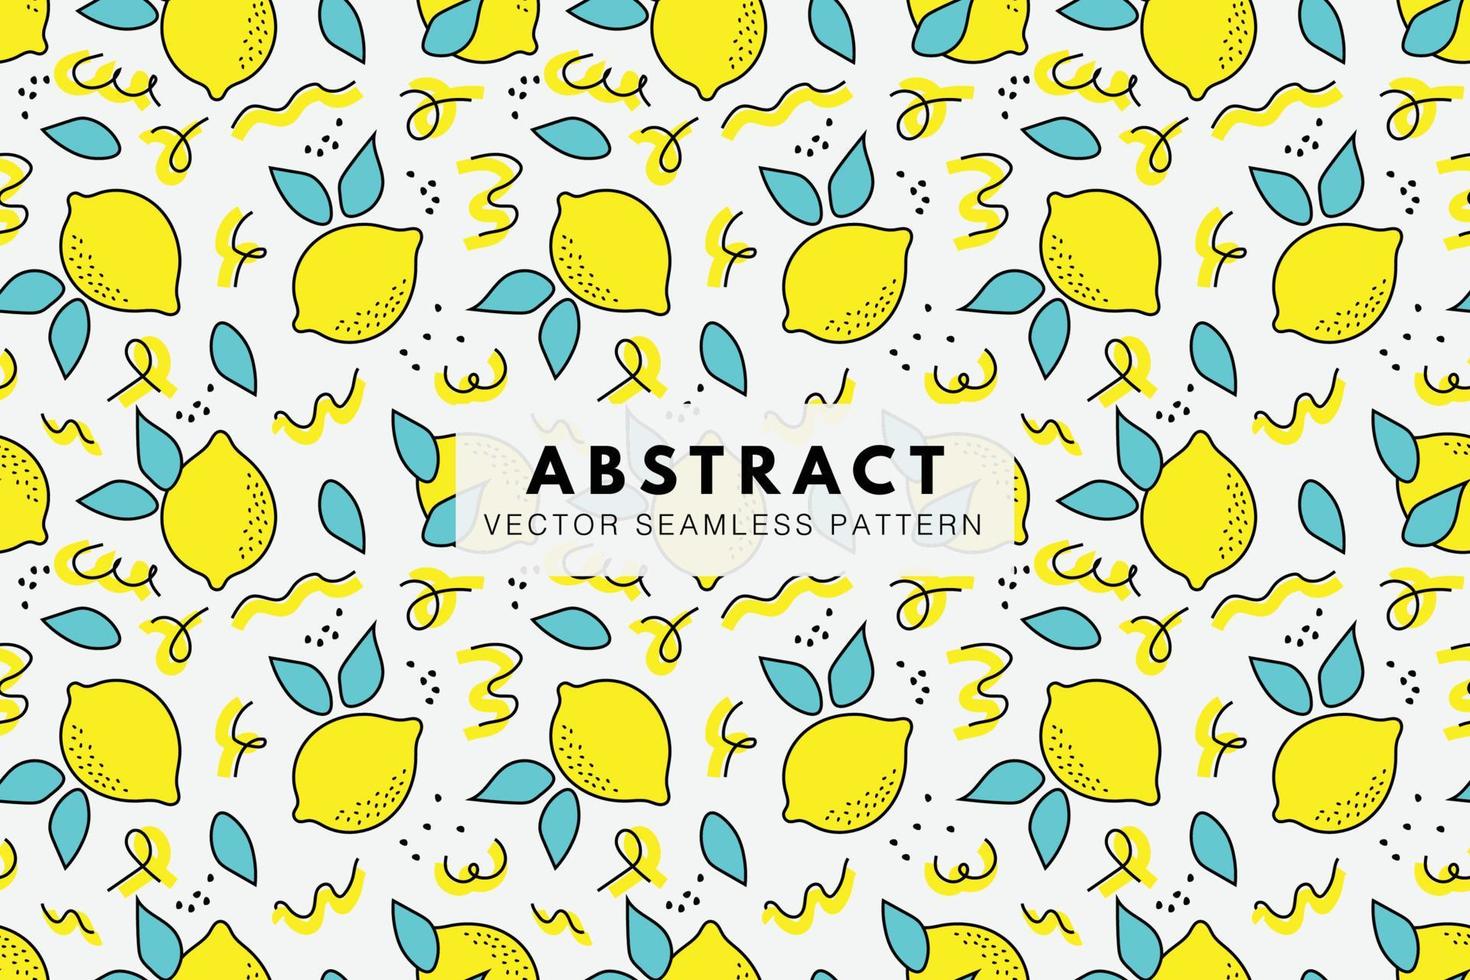 Lemon yellow fruit cute abstract seamless repeating pattern vector